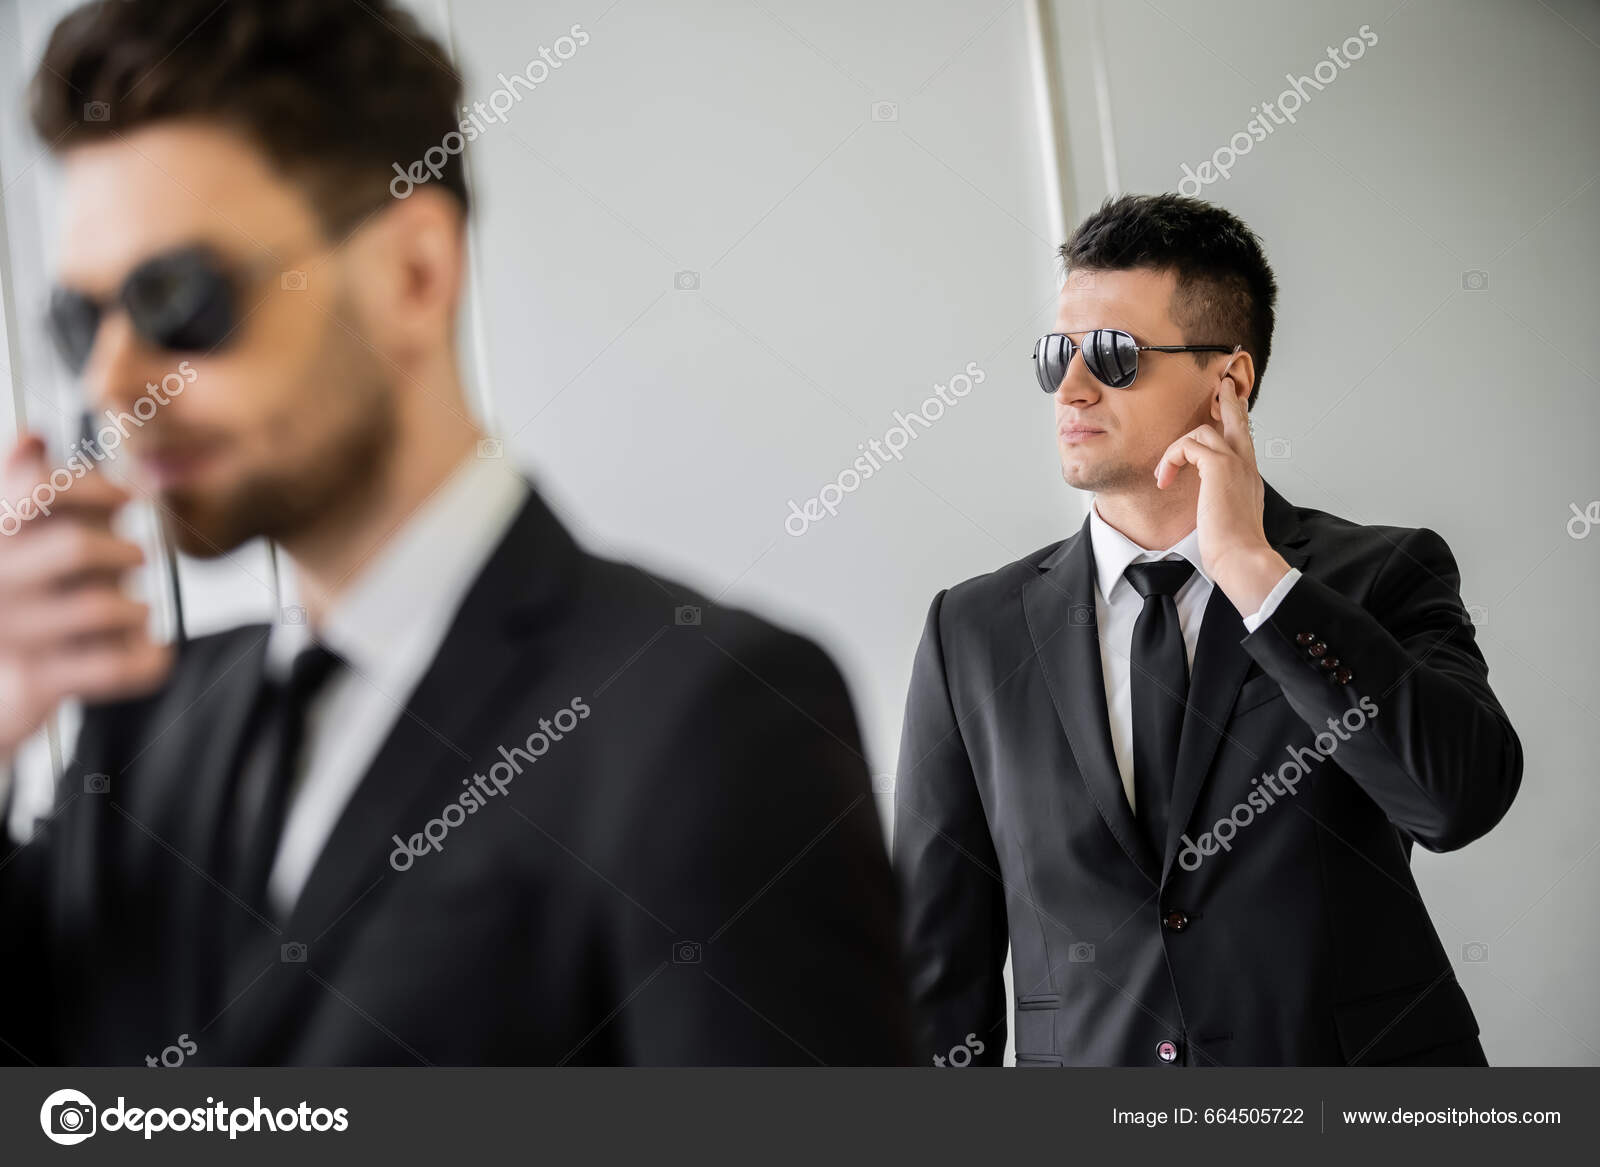 Serious Bodyguard Standing with Sunglasses and Security Earpiece